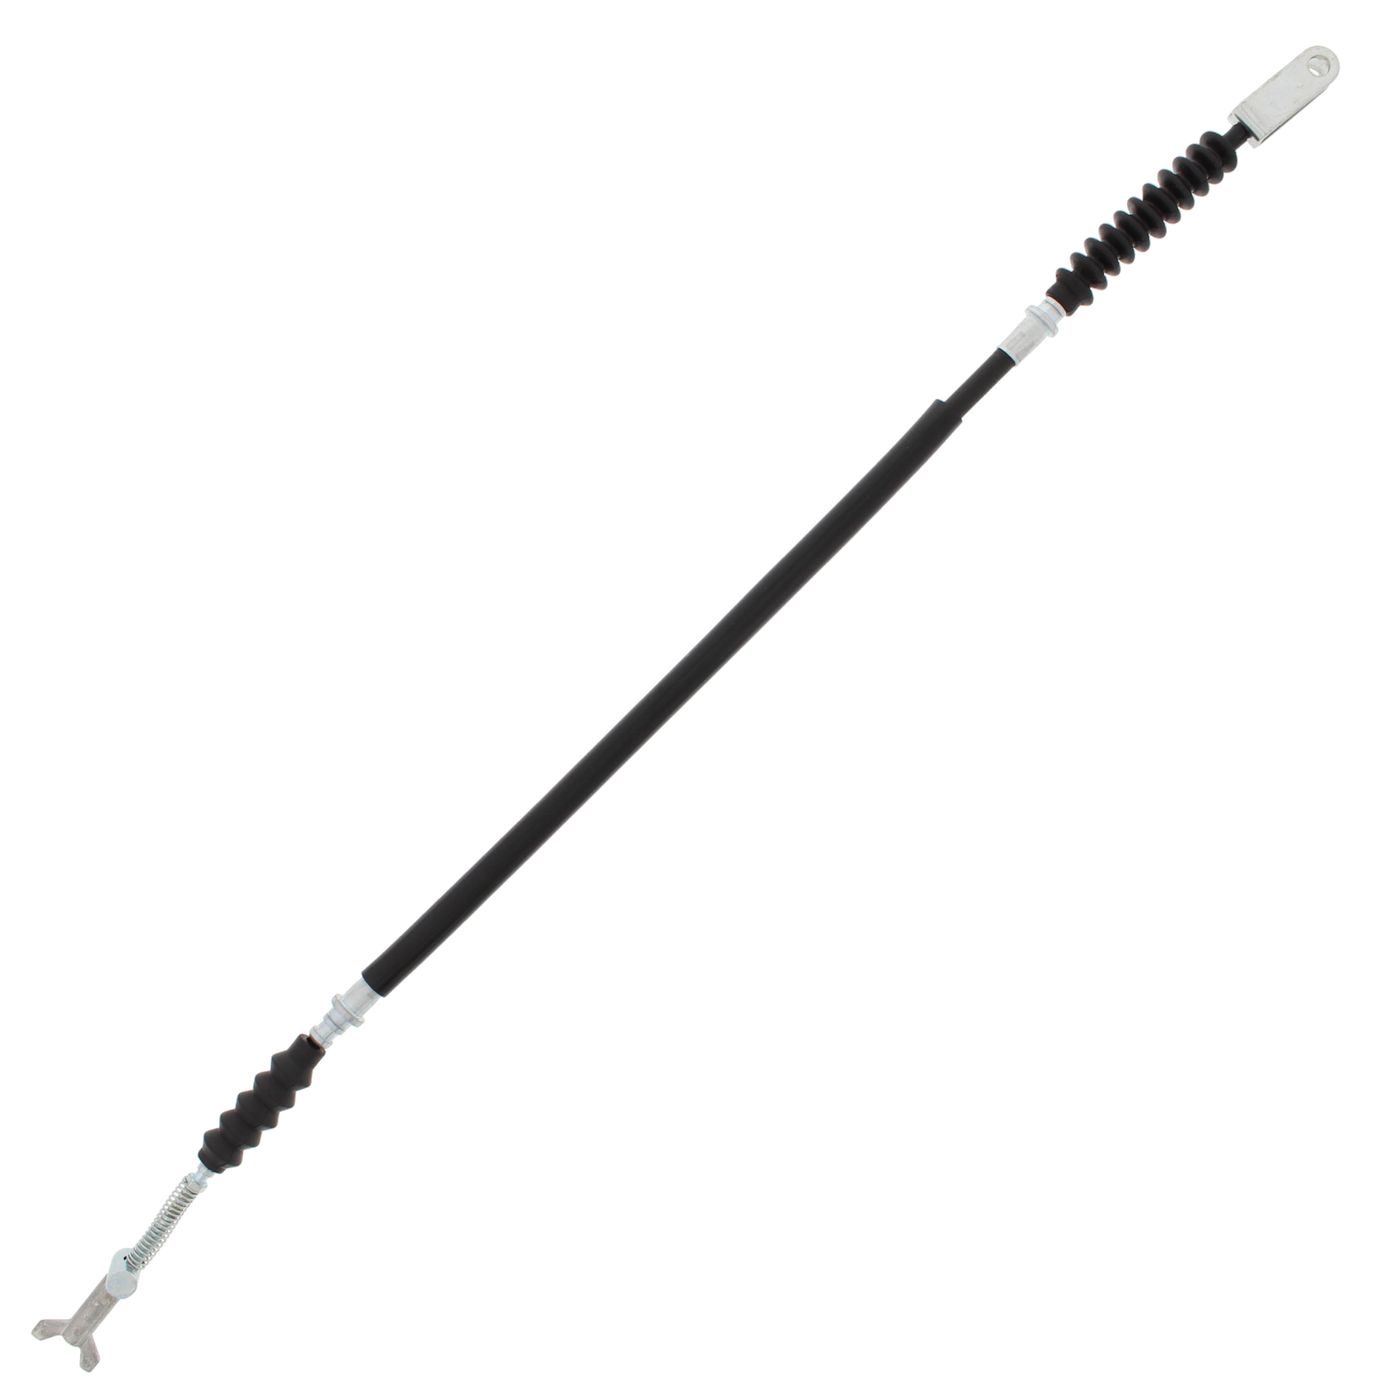 Wrp Brake Cables - WRP454025 image